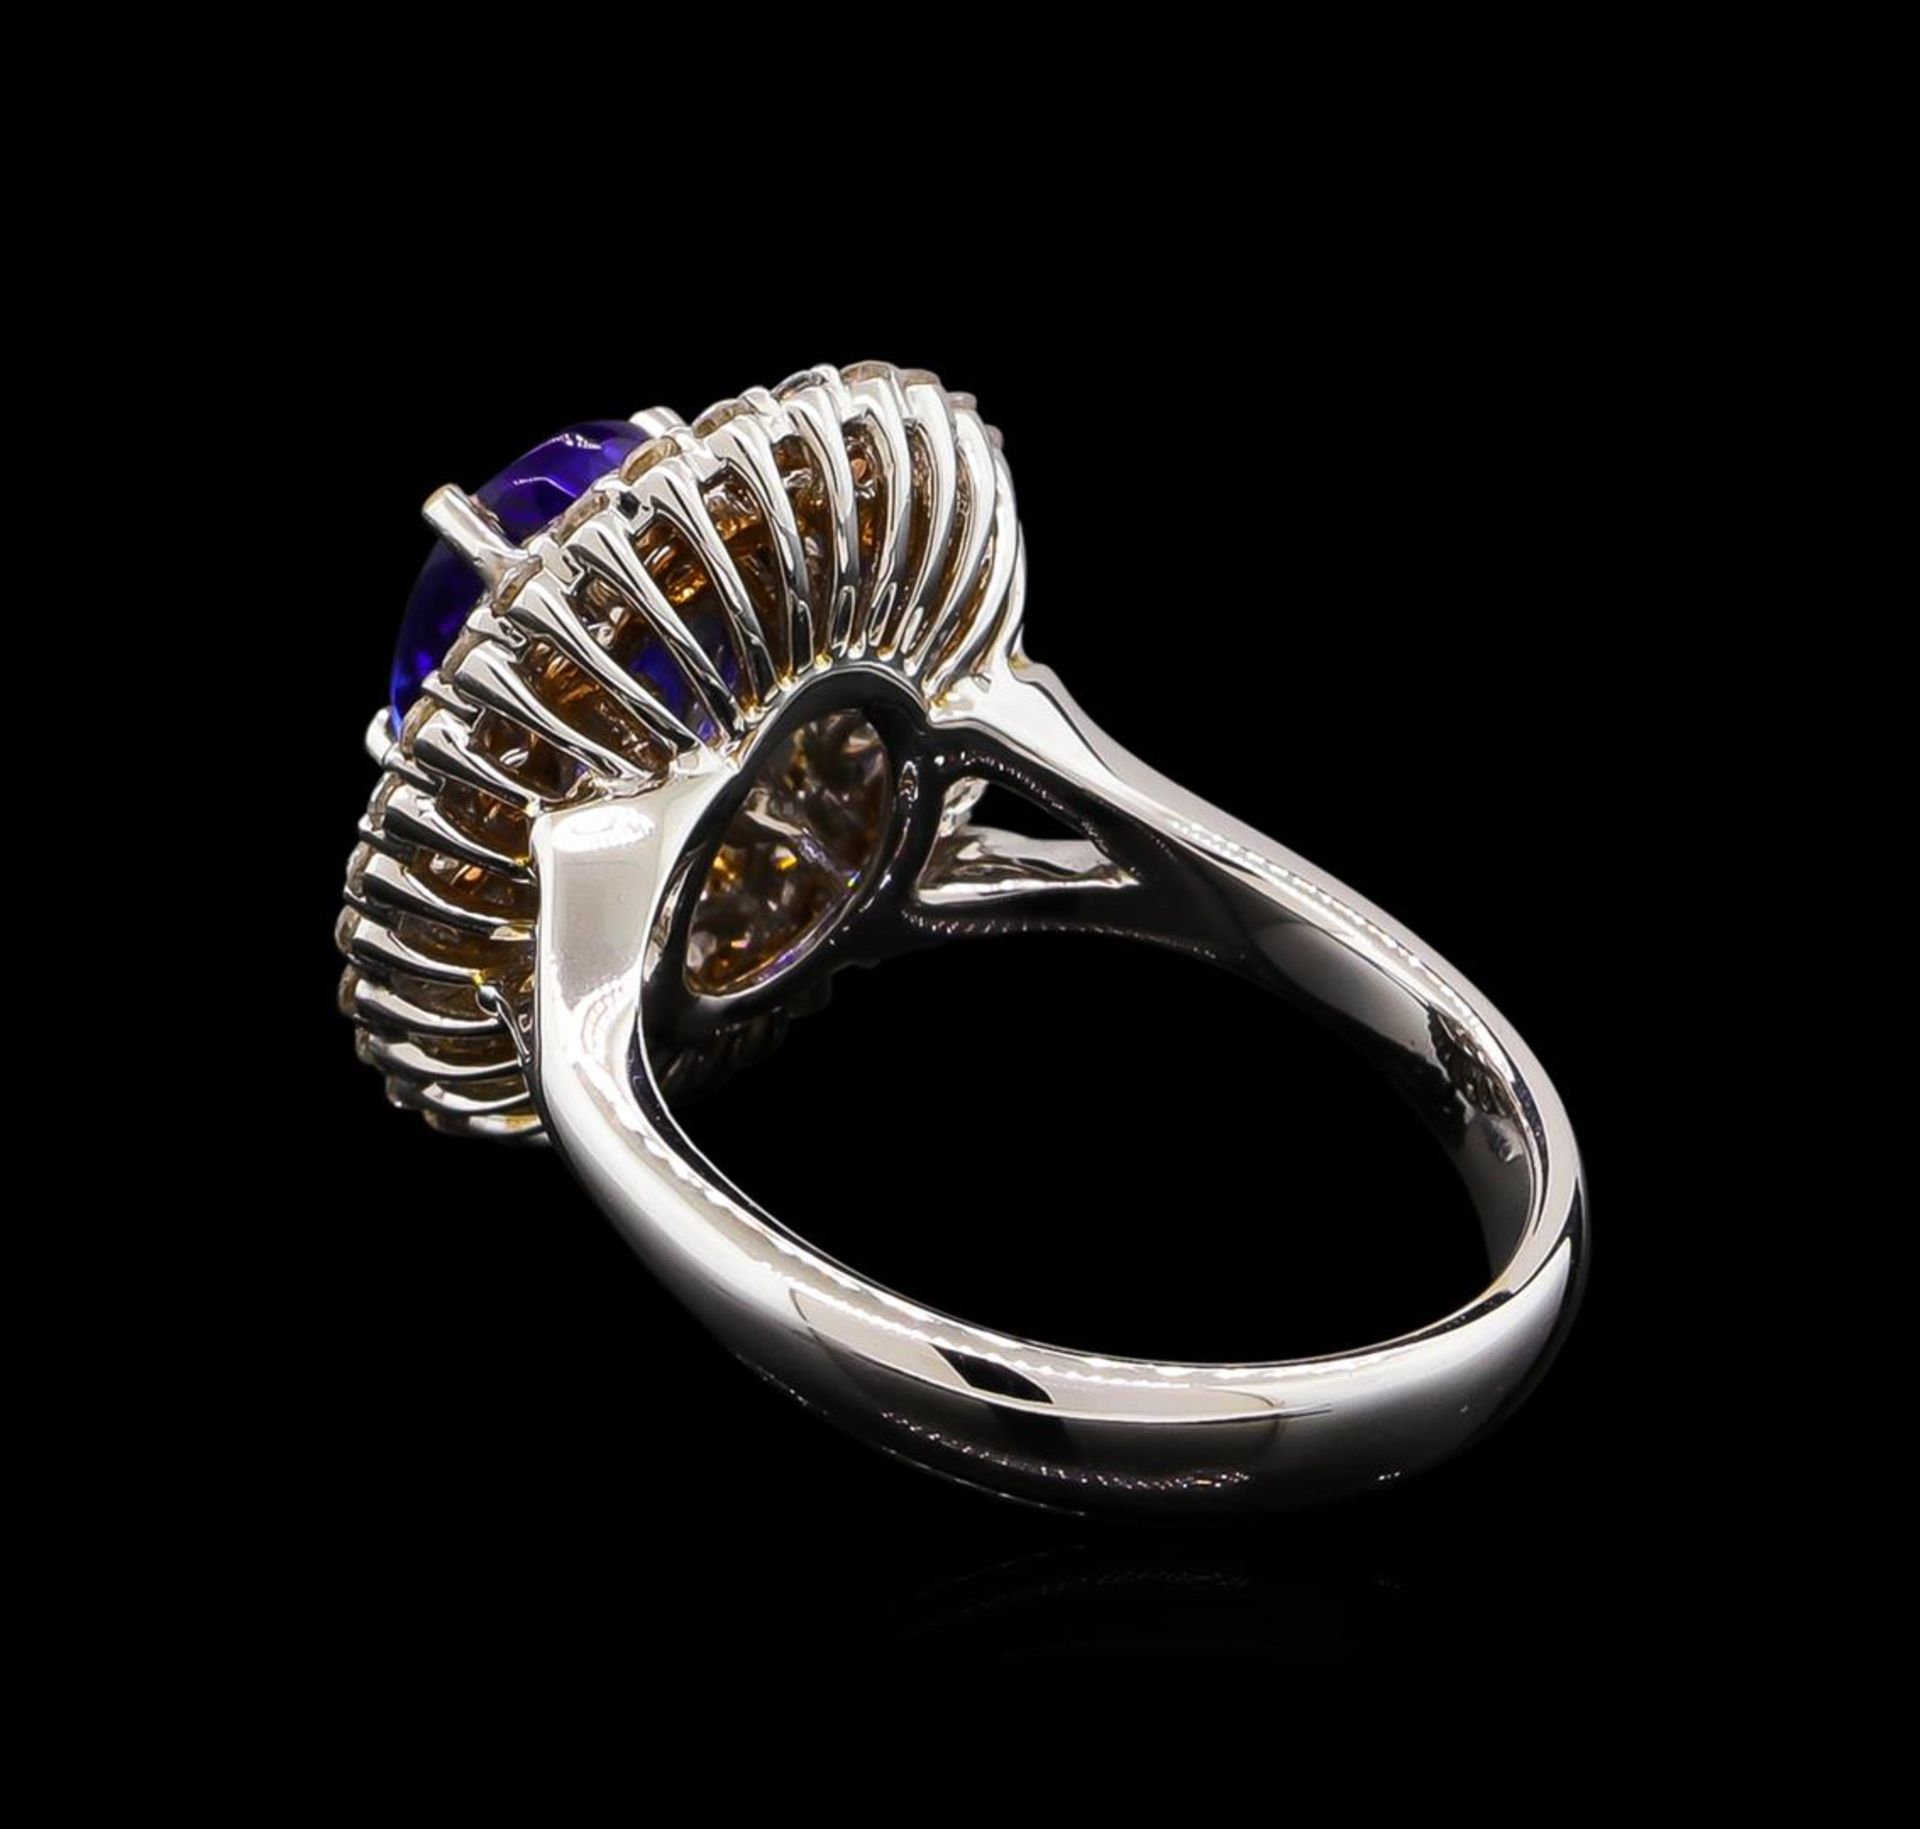 14KT Two-Tone Gold 1.73ct Tanzanite and Diamond Ring - Image 3 of 5